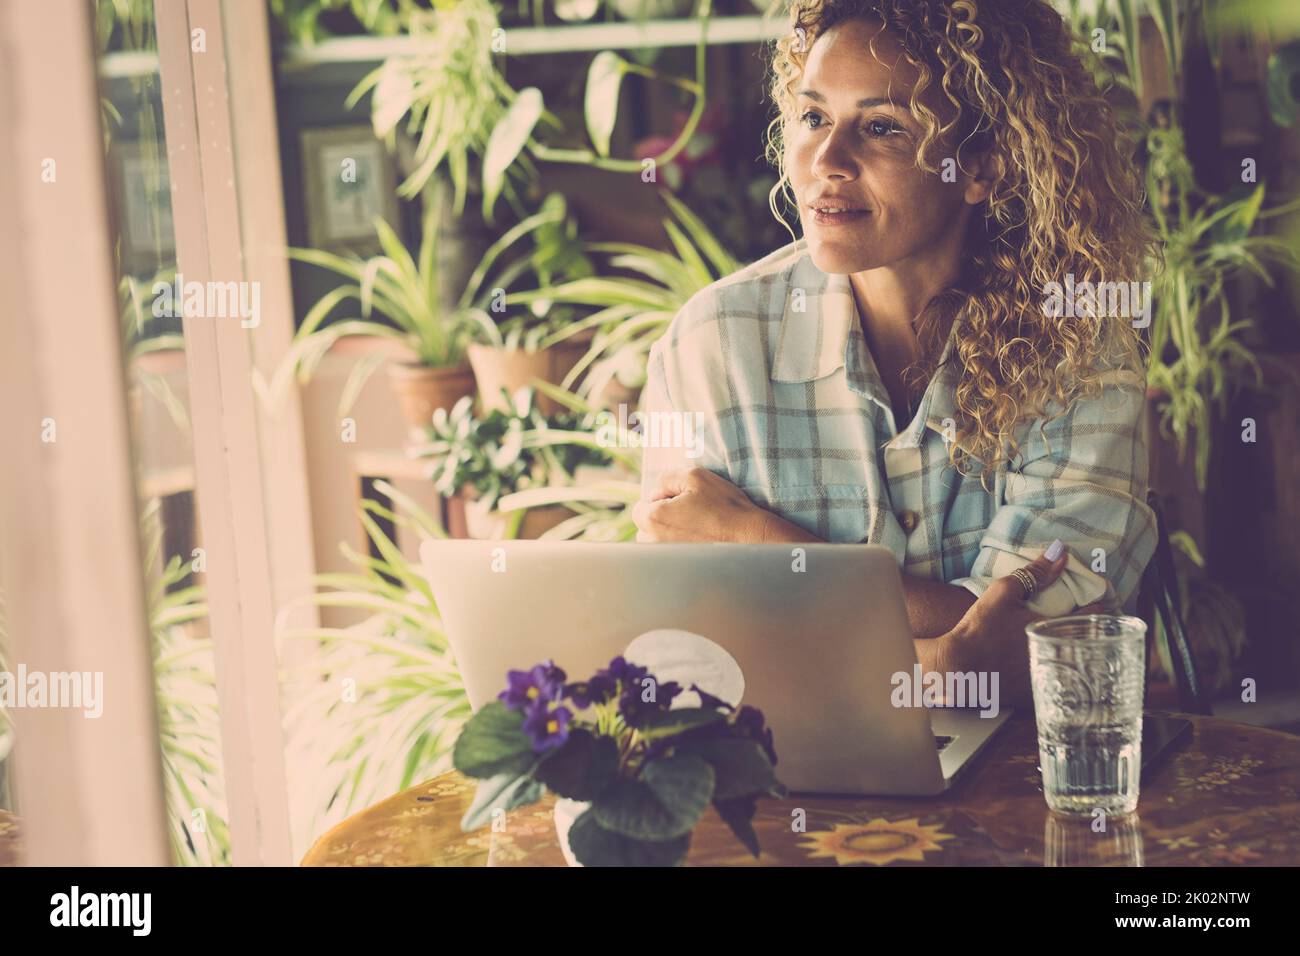 Serene people after work online with laptop computer. Cheerful confident portrait of adult woman enjoying break after business digital job. Concept of people in smart working sitting at the table Stock Photo